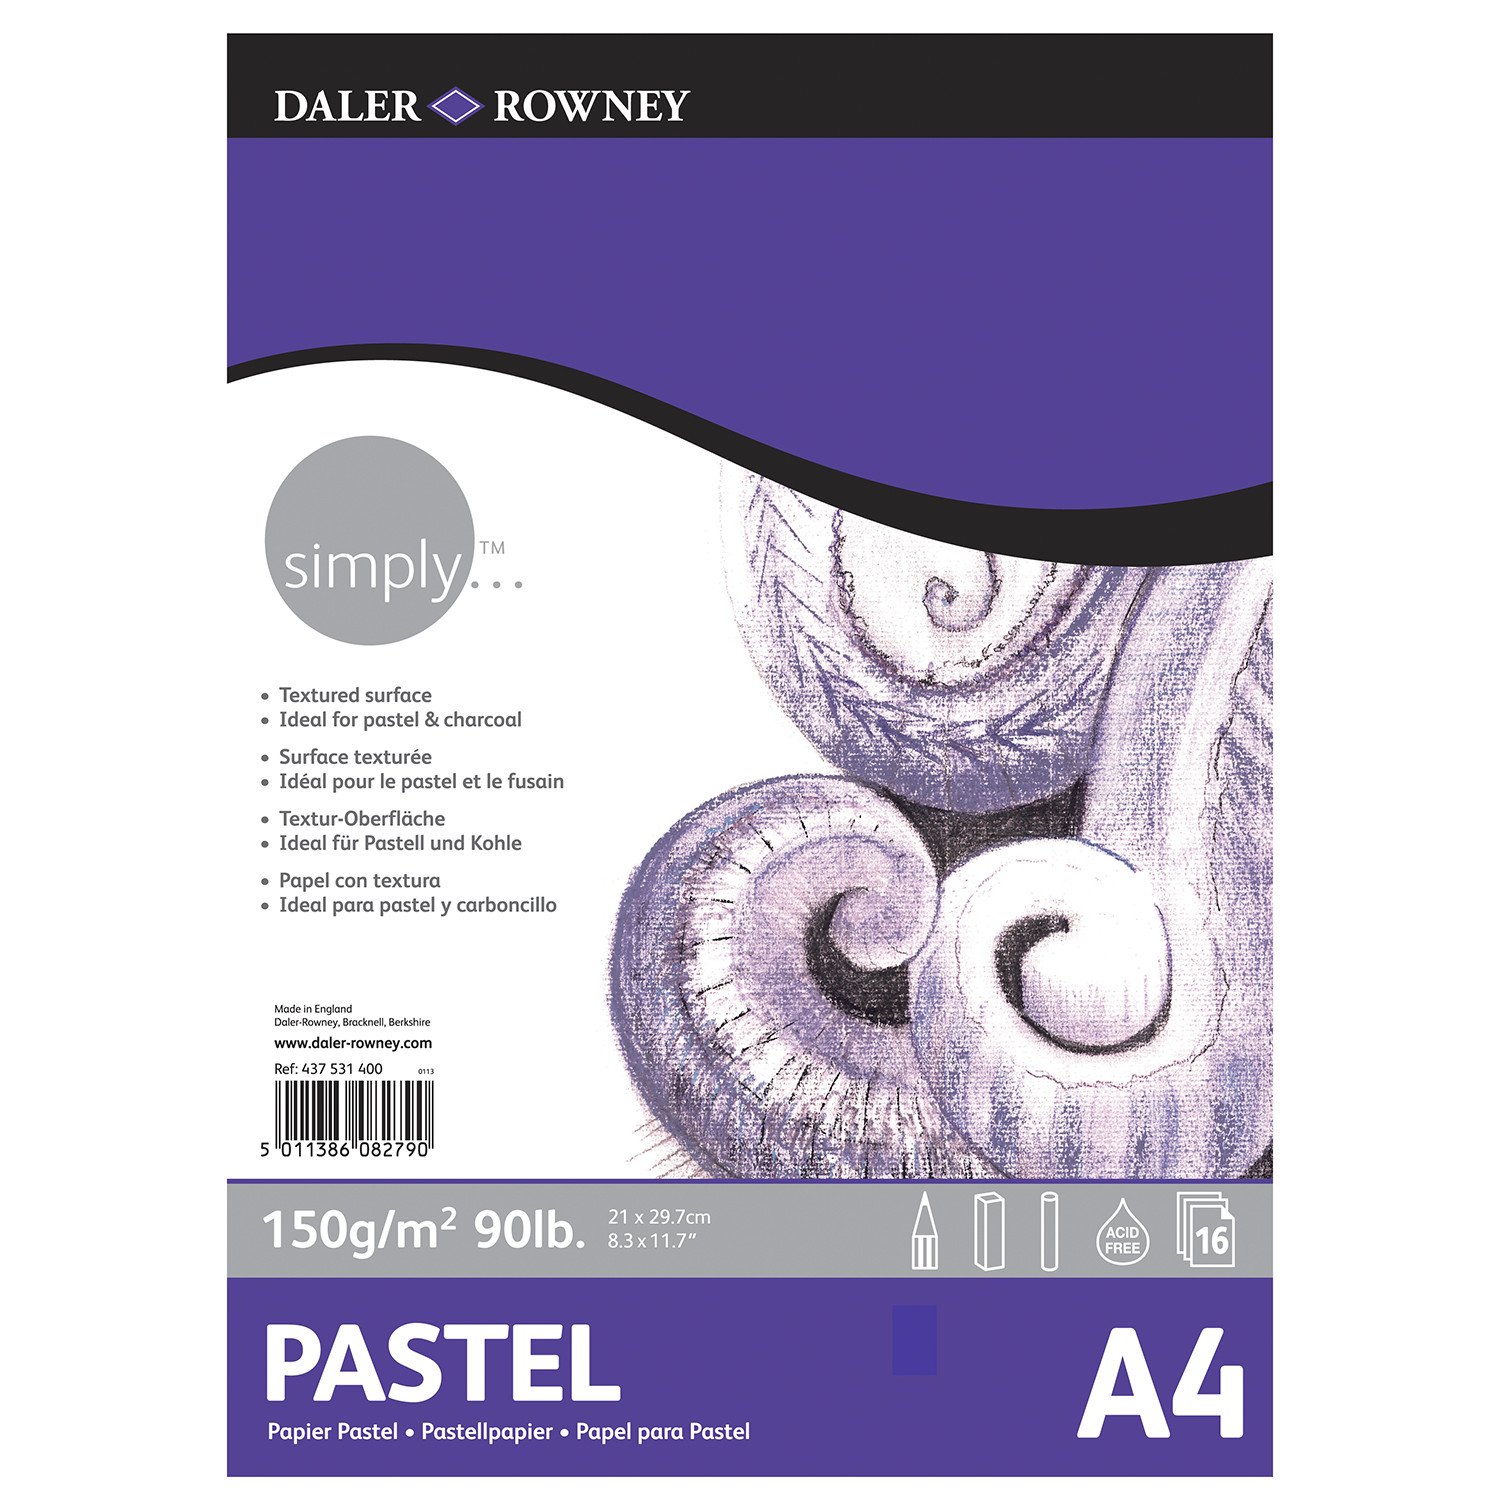 Daler-Rowney Simply Pastel Pad - A4 Image